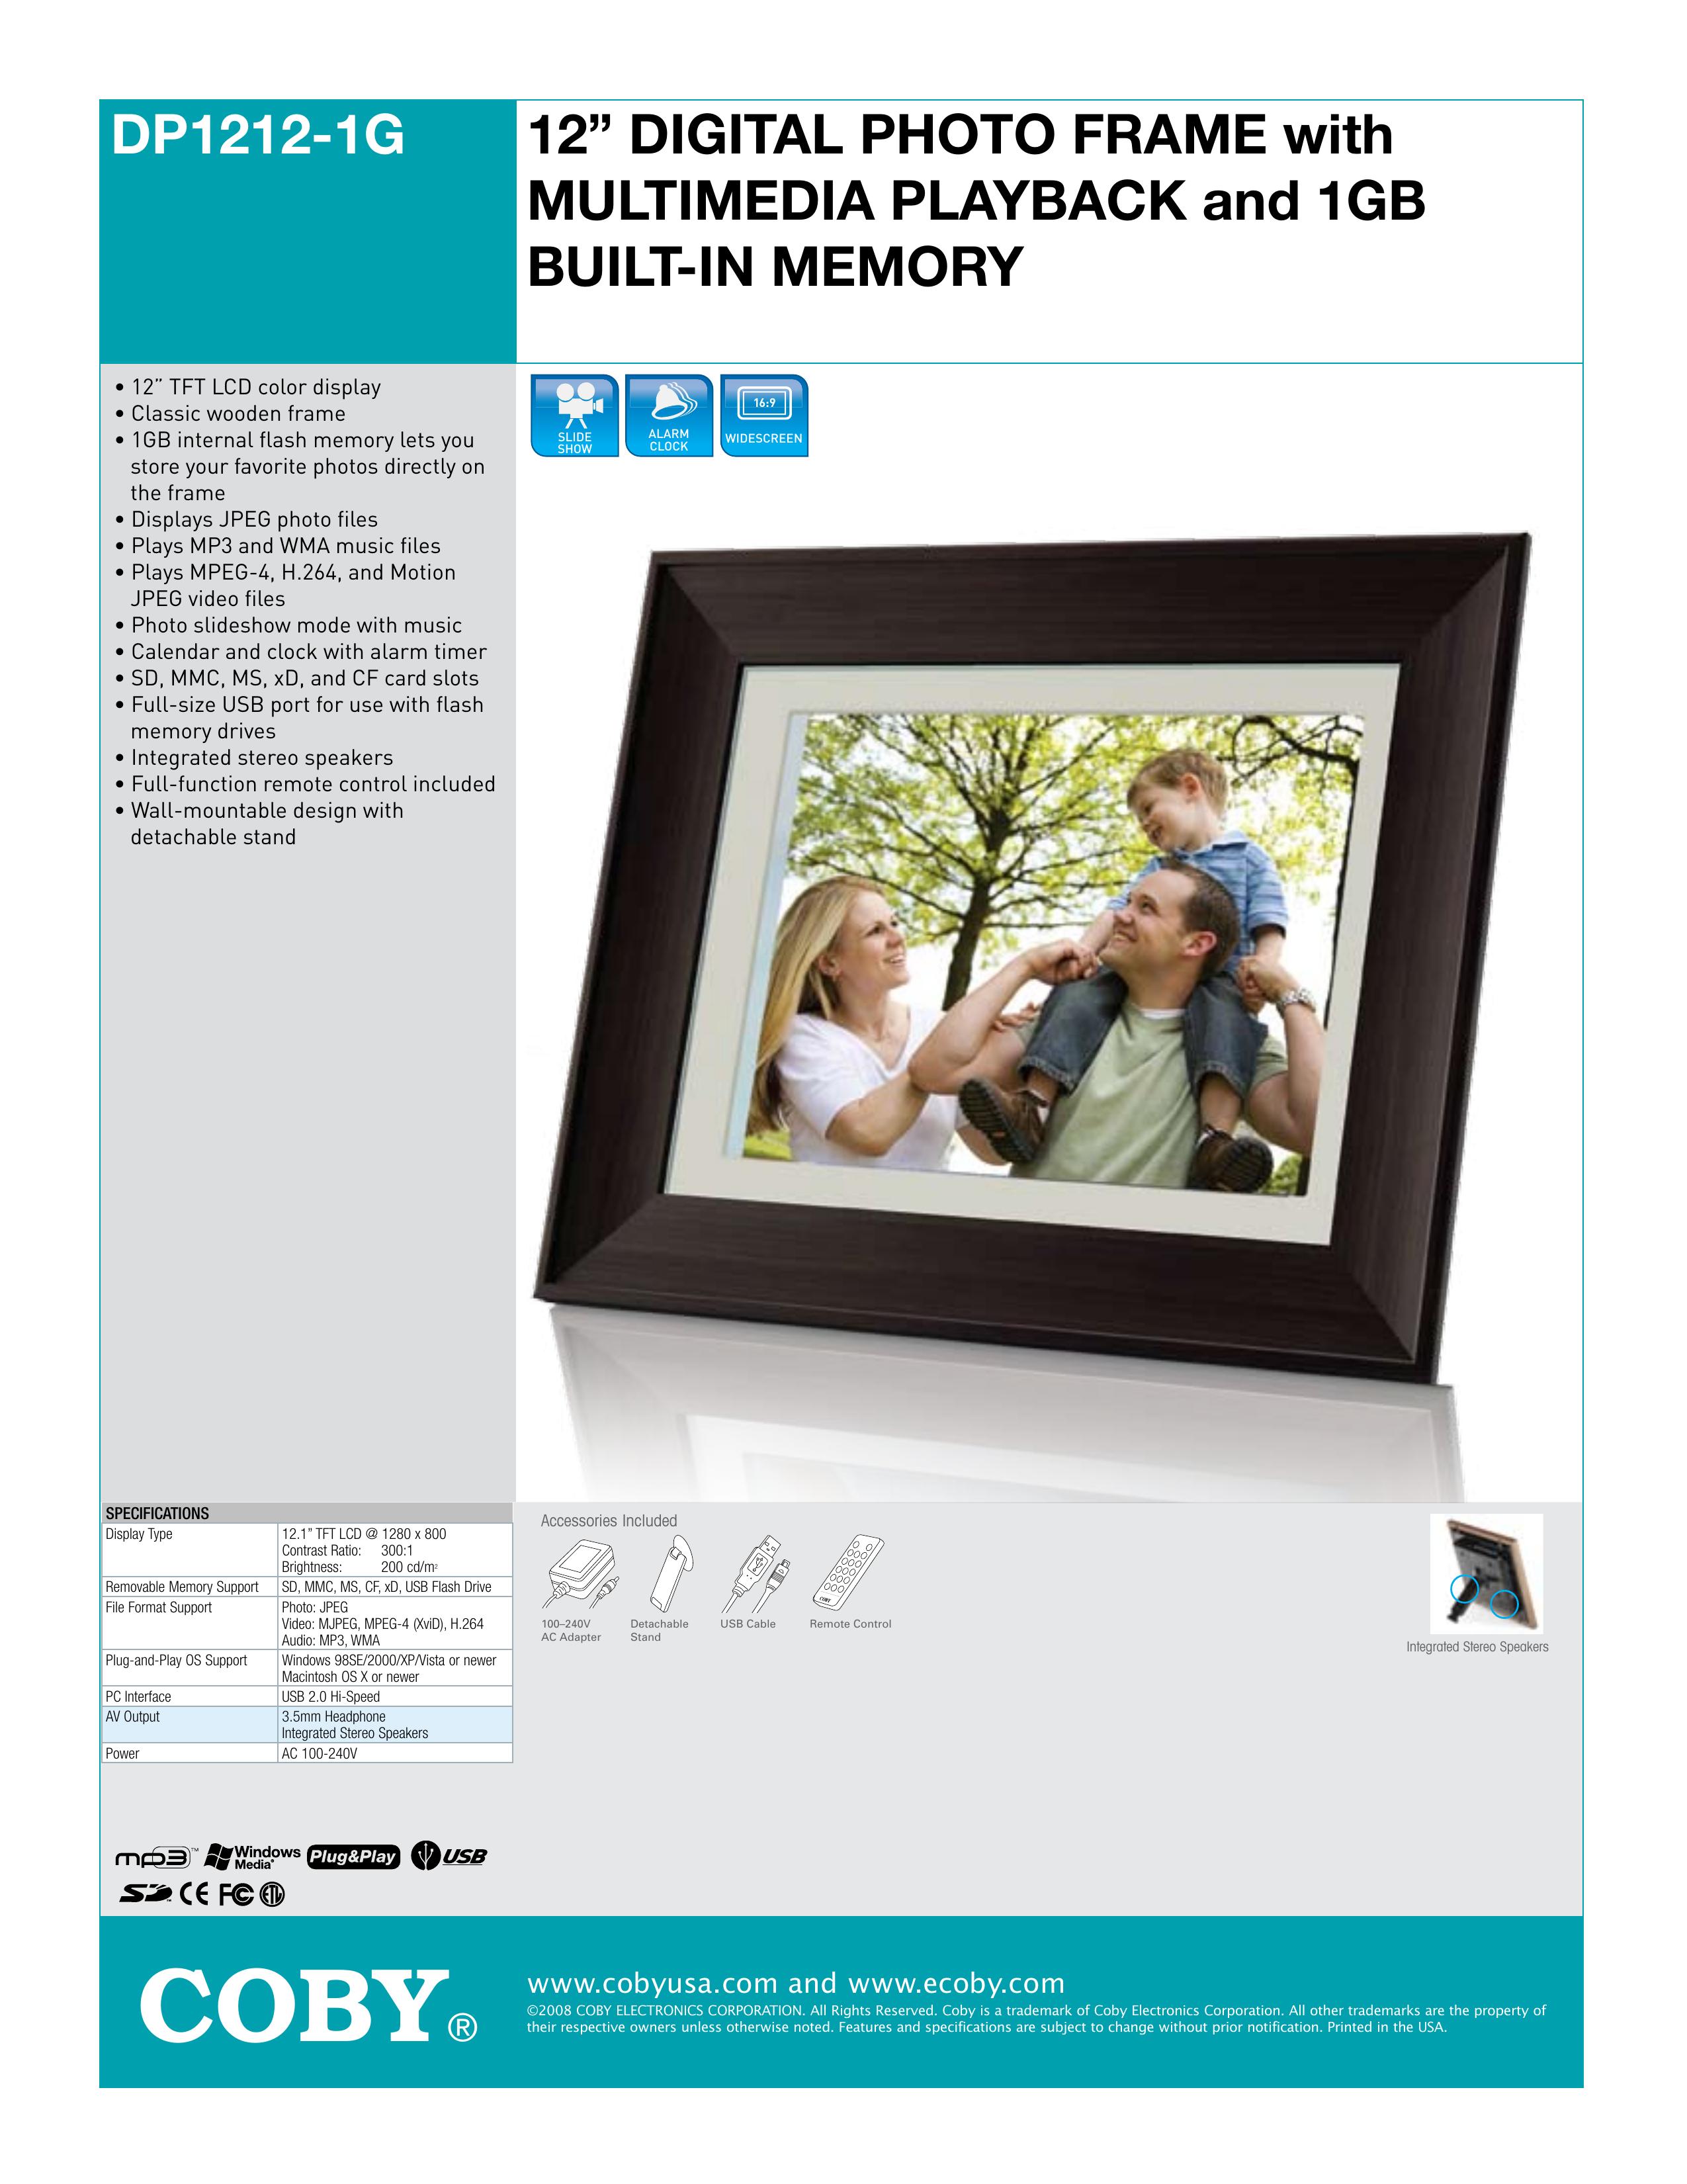 COBY electronic DP1212-1G Digital Photo Frame User Manual